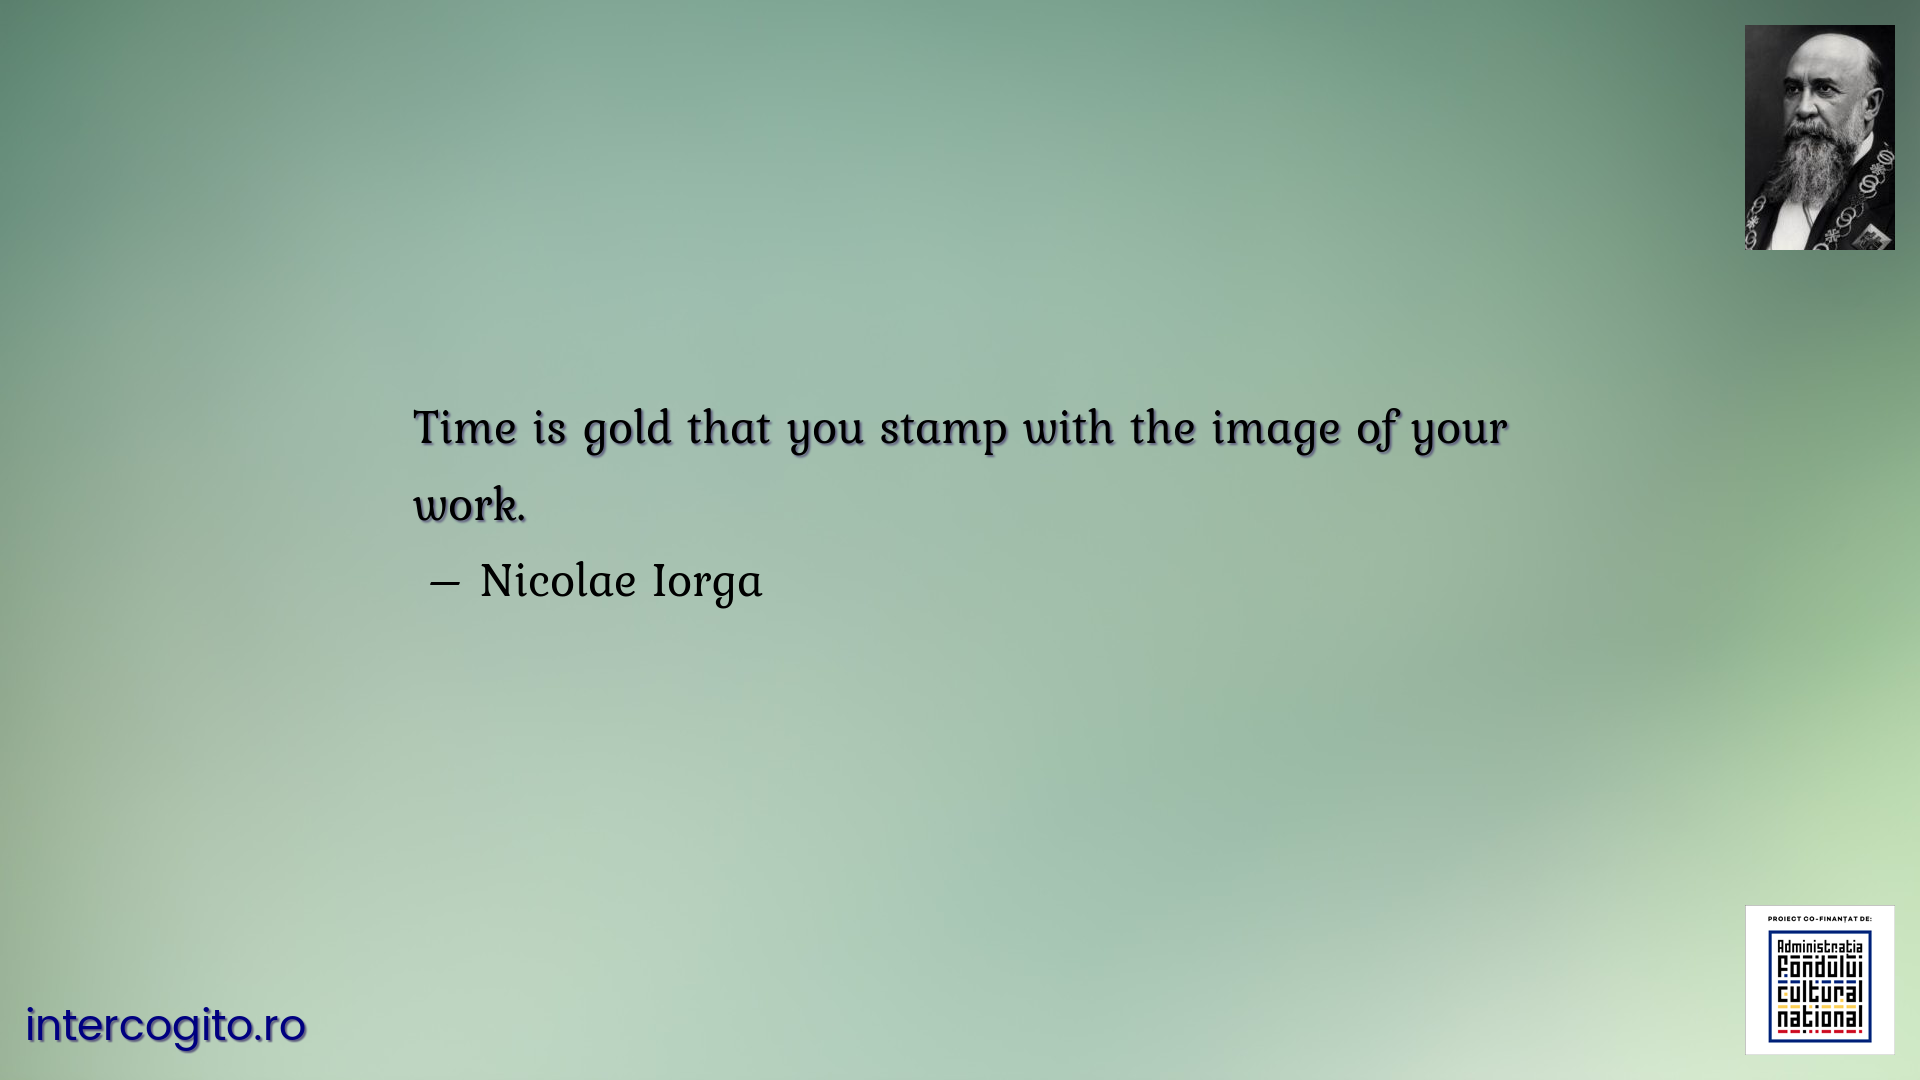 Time is gold that you stamp with the image of your work.